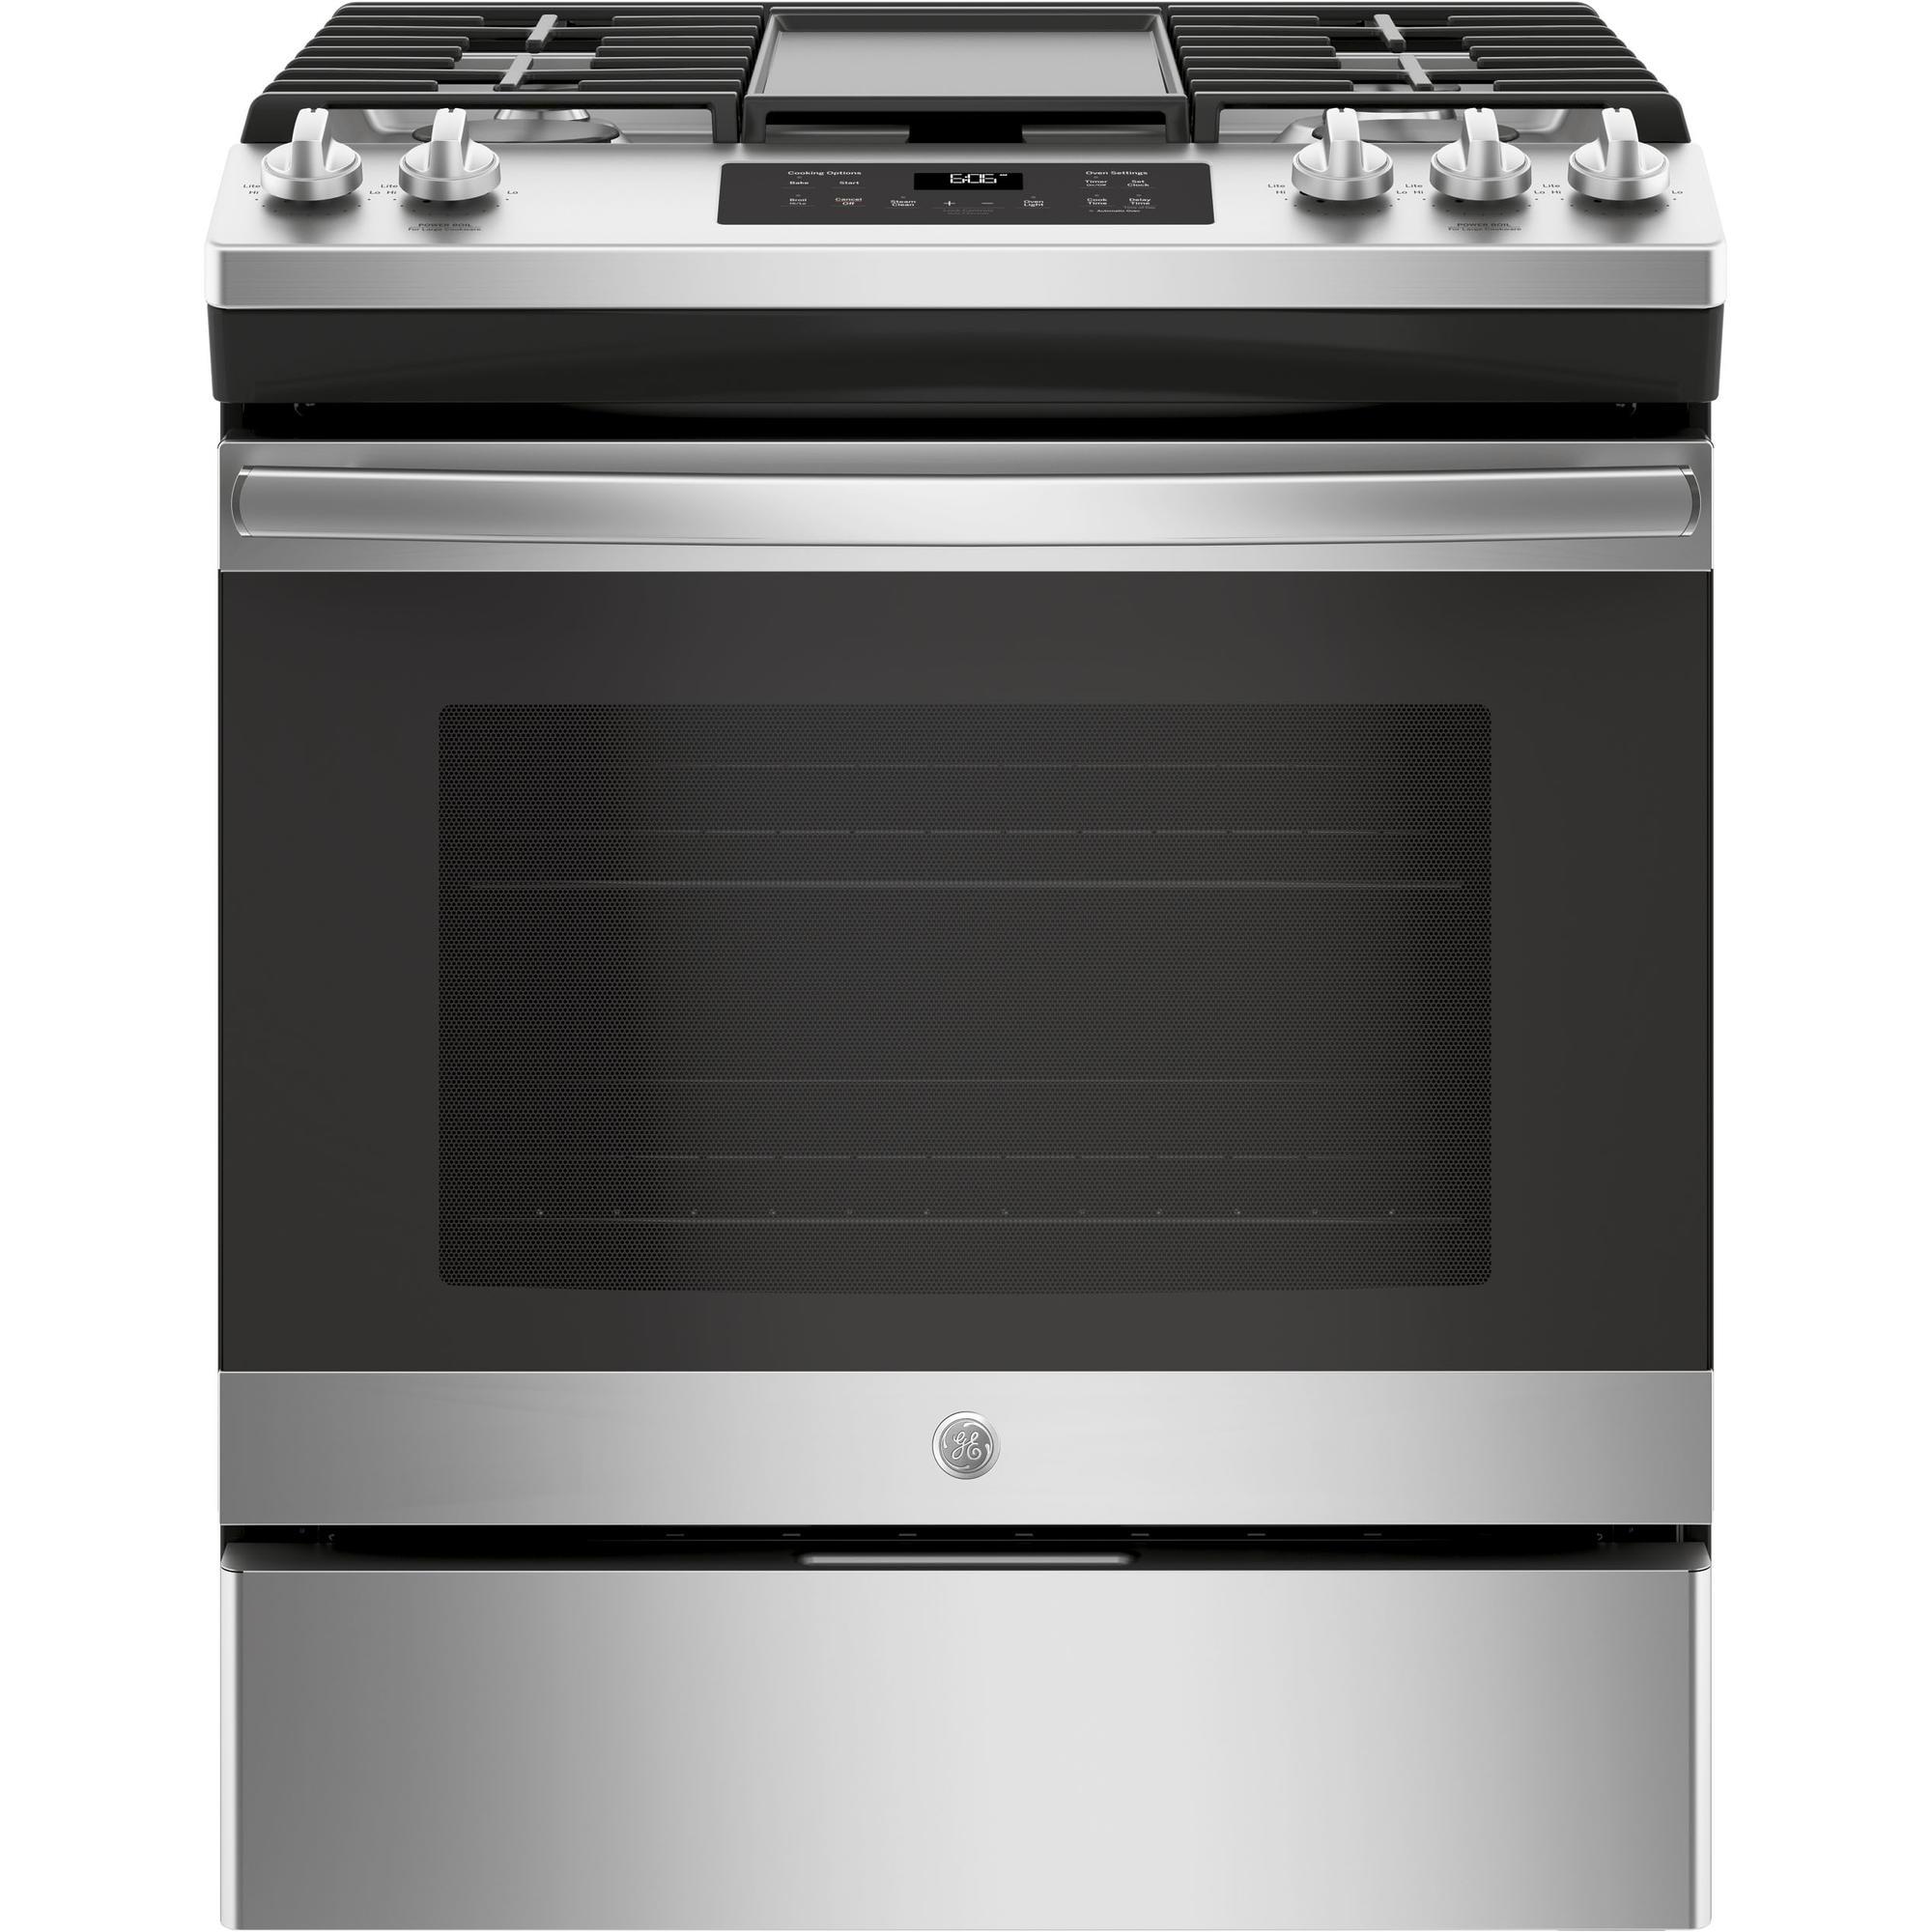 GE JGSS66SELSS 30" Slide-In Front Control Gas Range - Stainless Steel